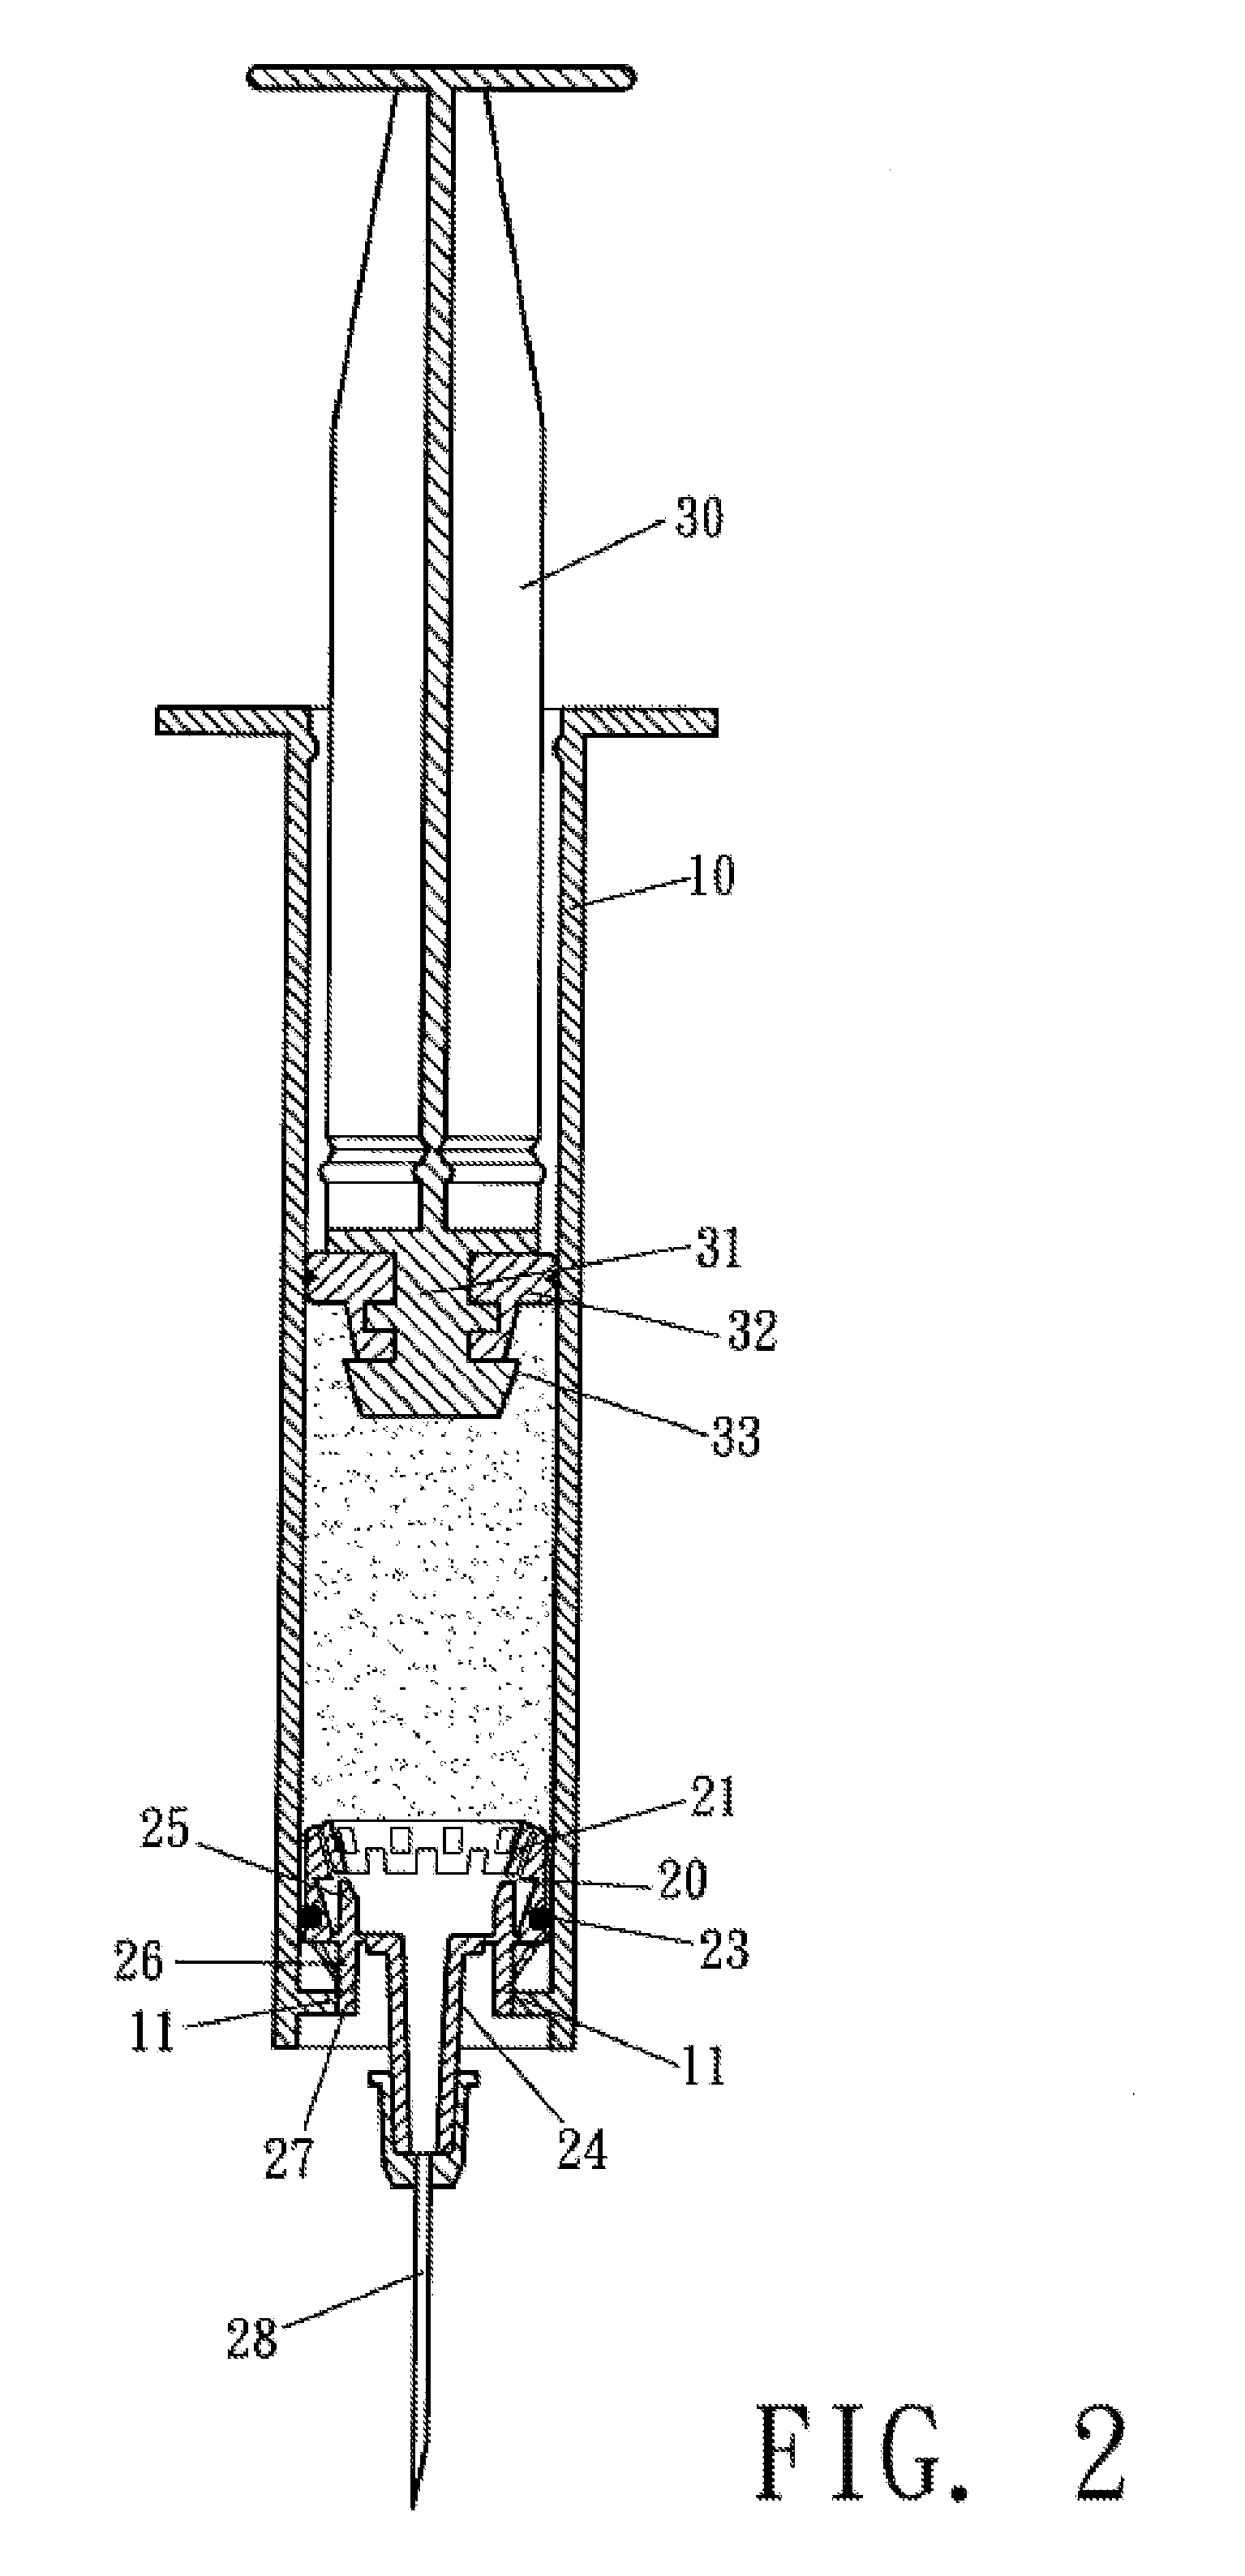 Disposable safety syringe structure